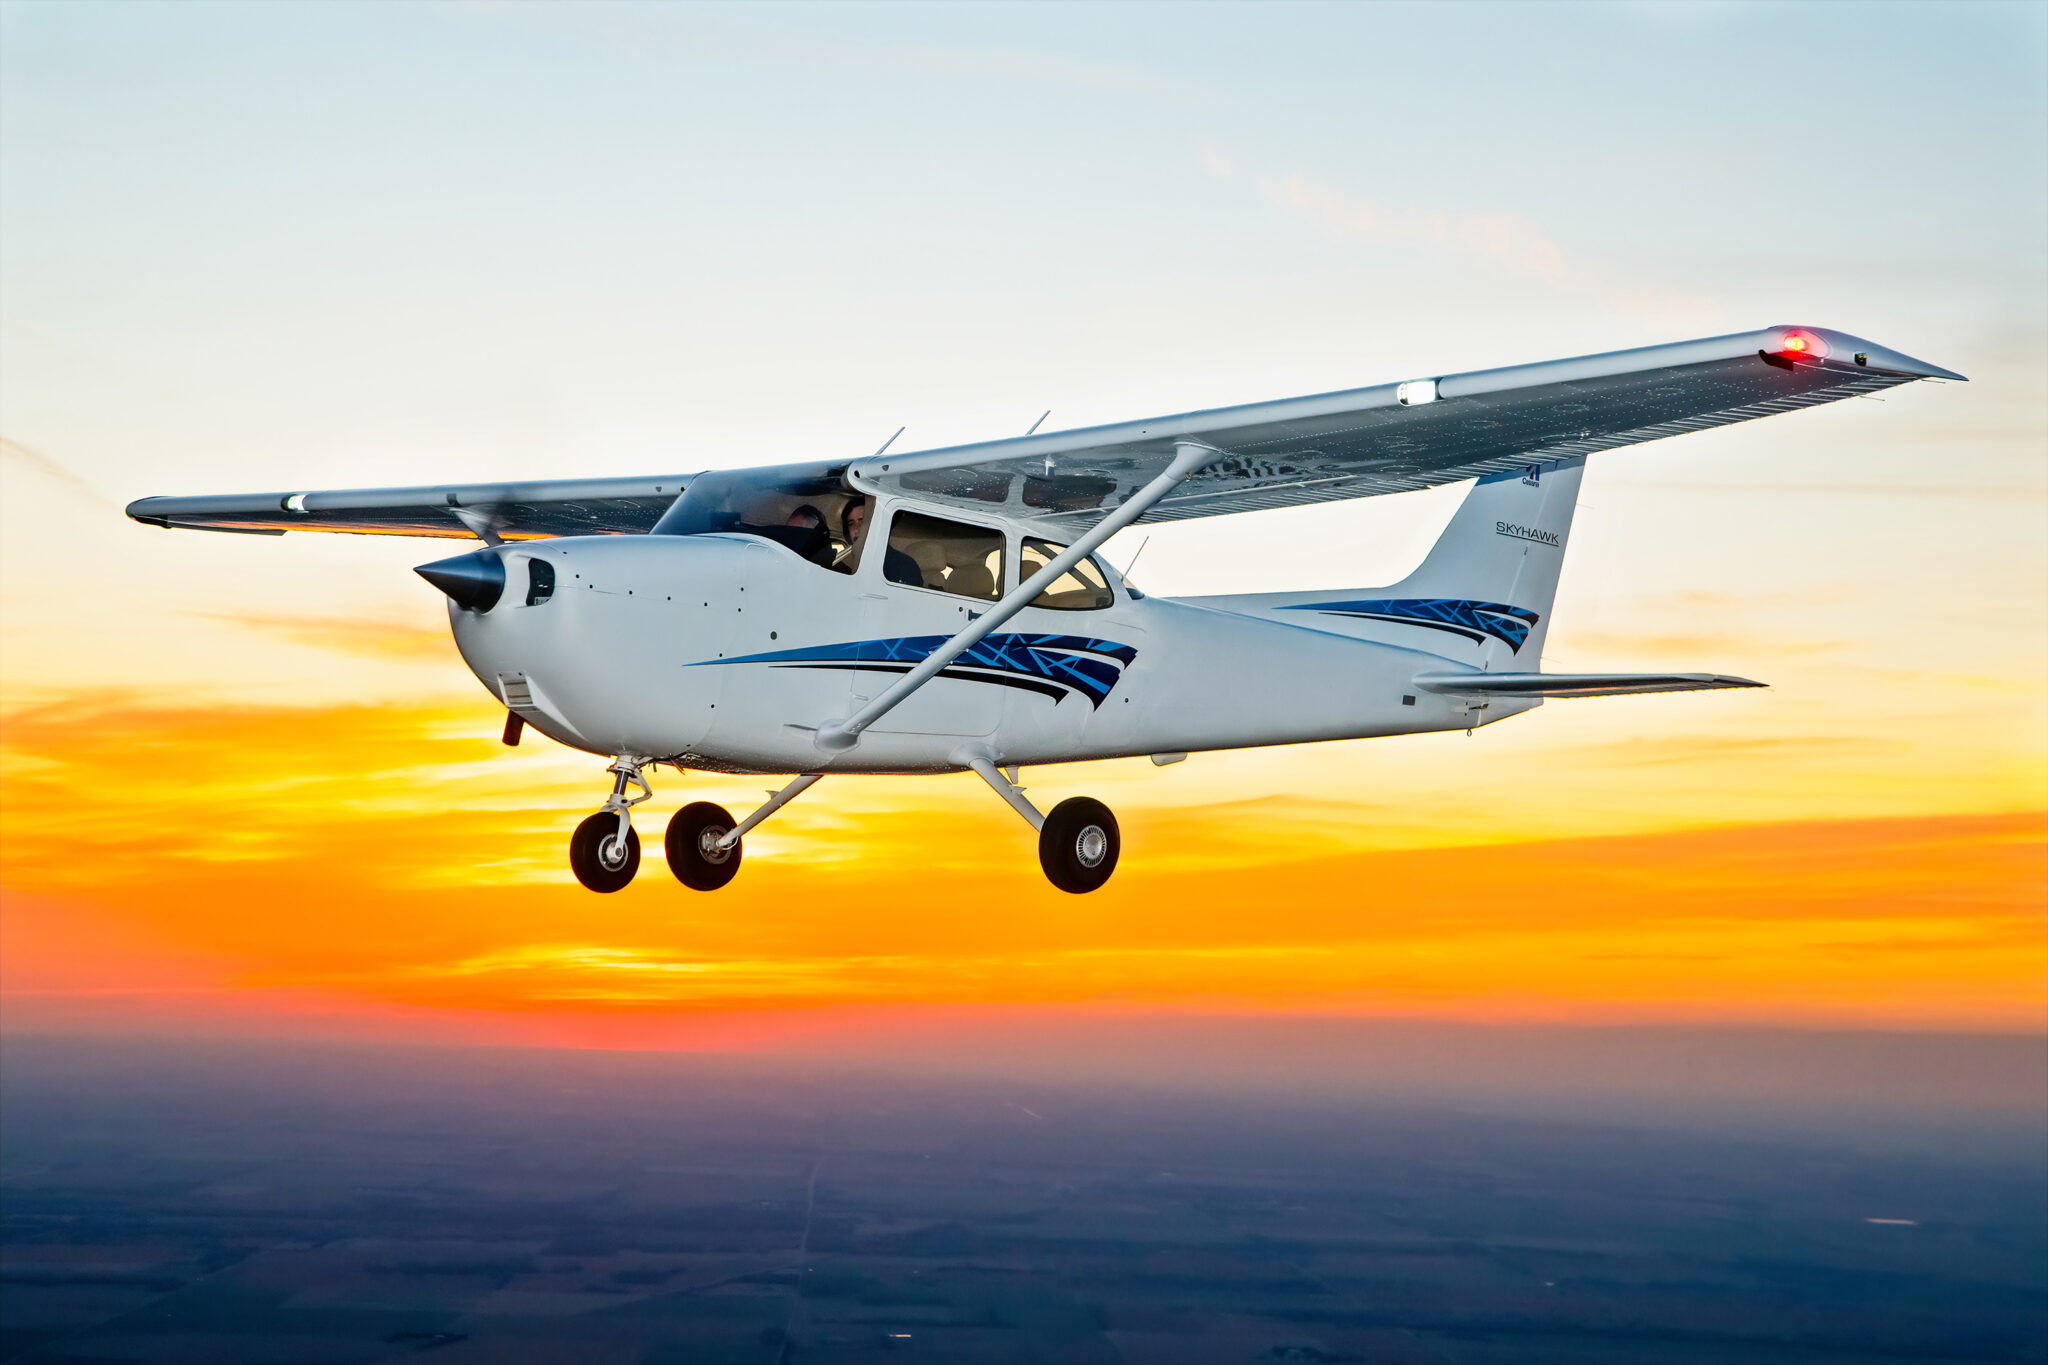 Textron Aviation announces order for 40 Cessna Skyhawks to support pilot training for ATP Flight School